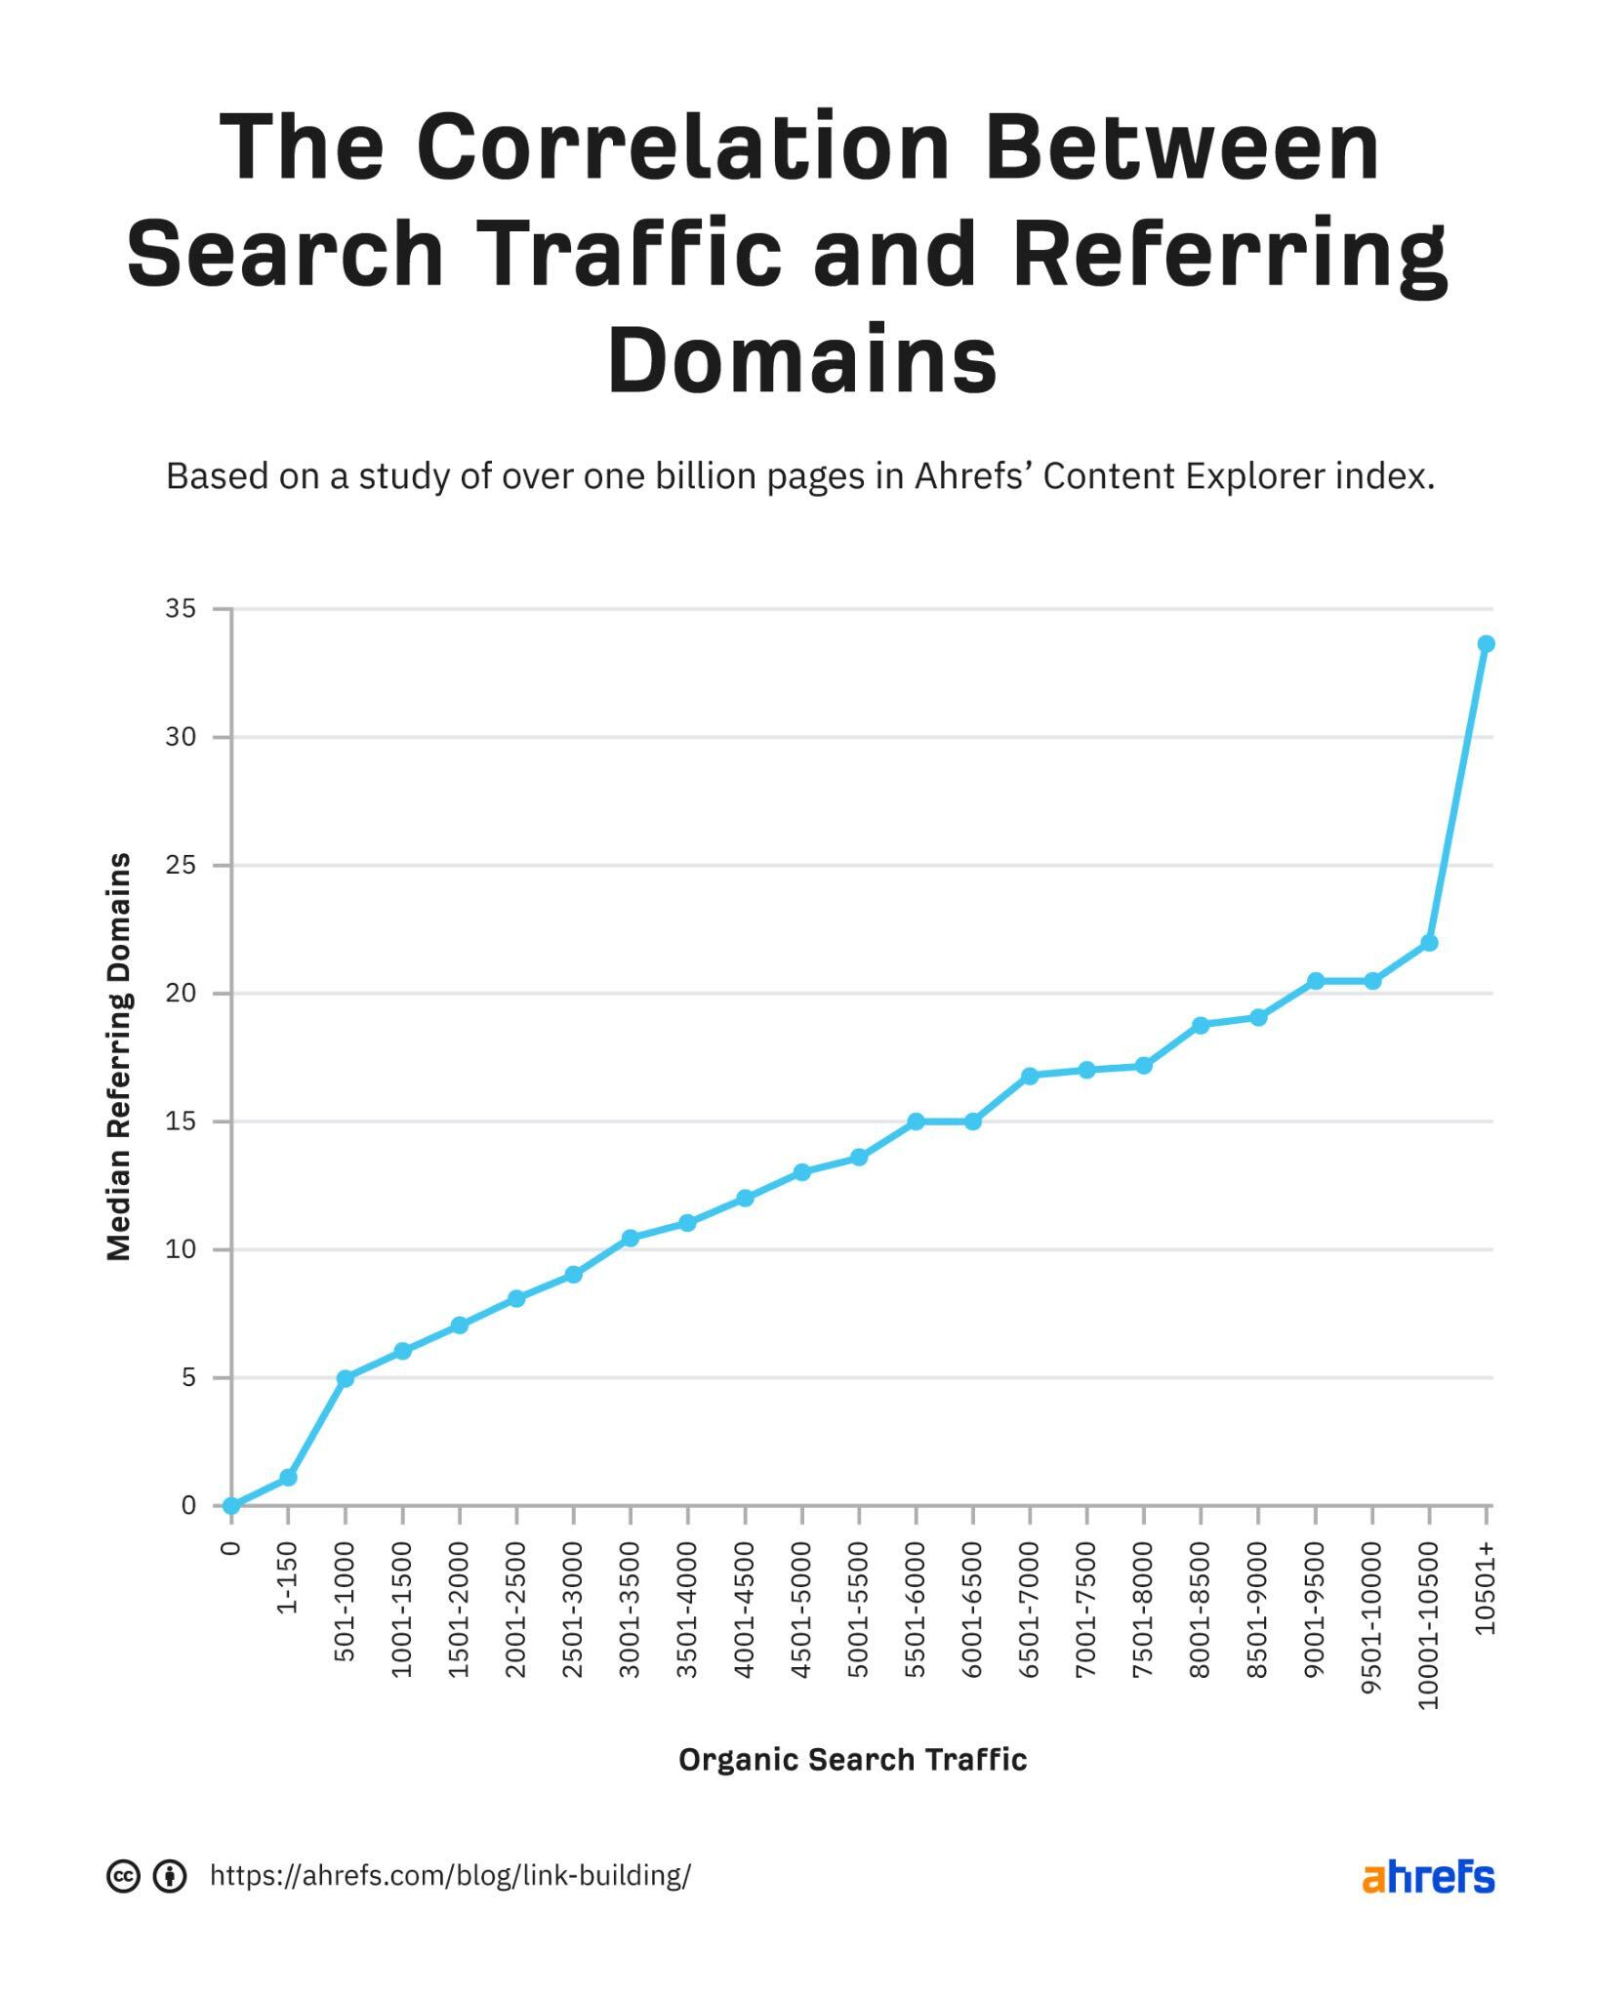 Graph of the correlation between organic search traffic and median referring domains